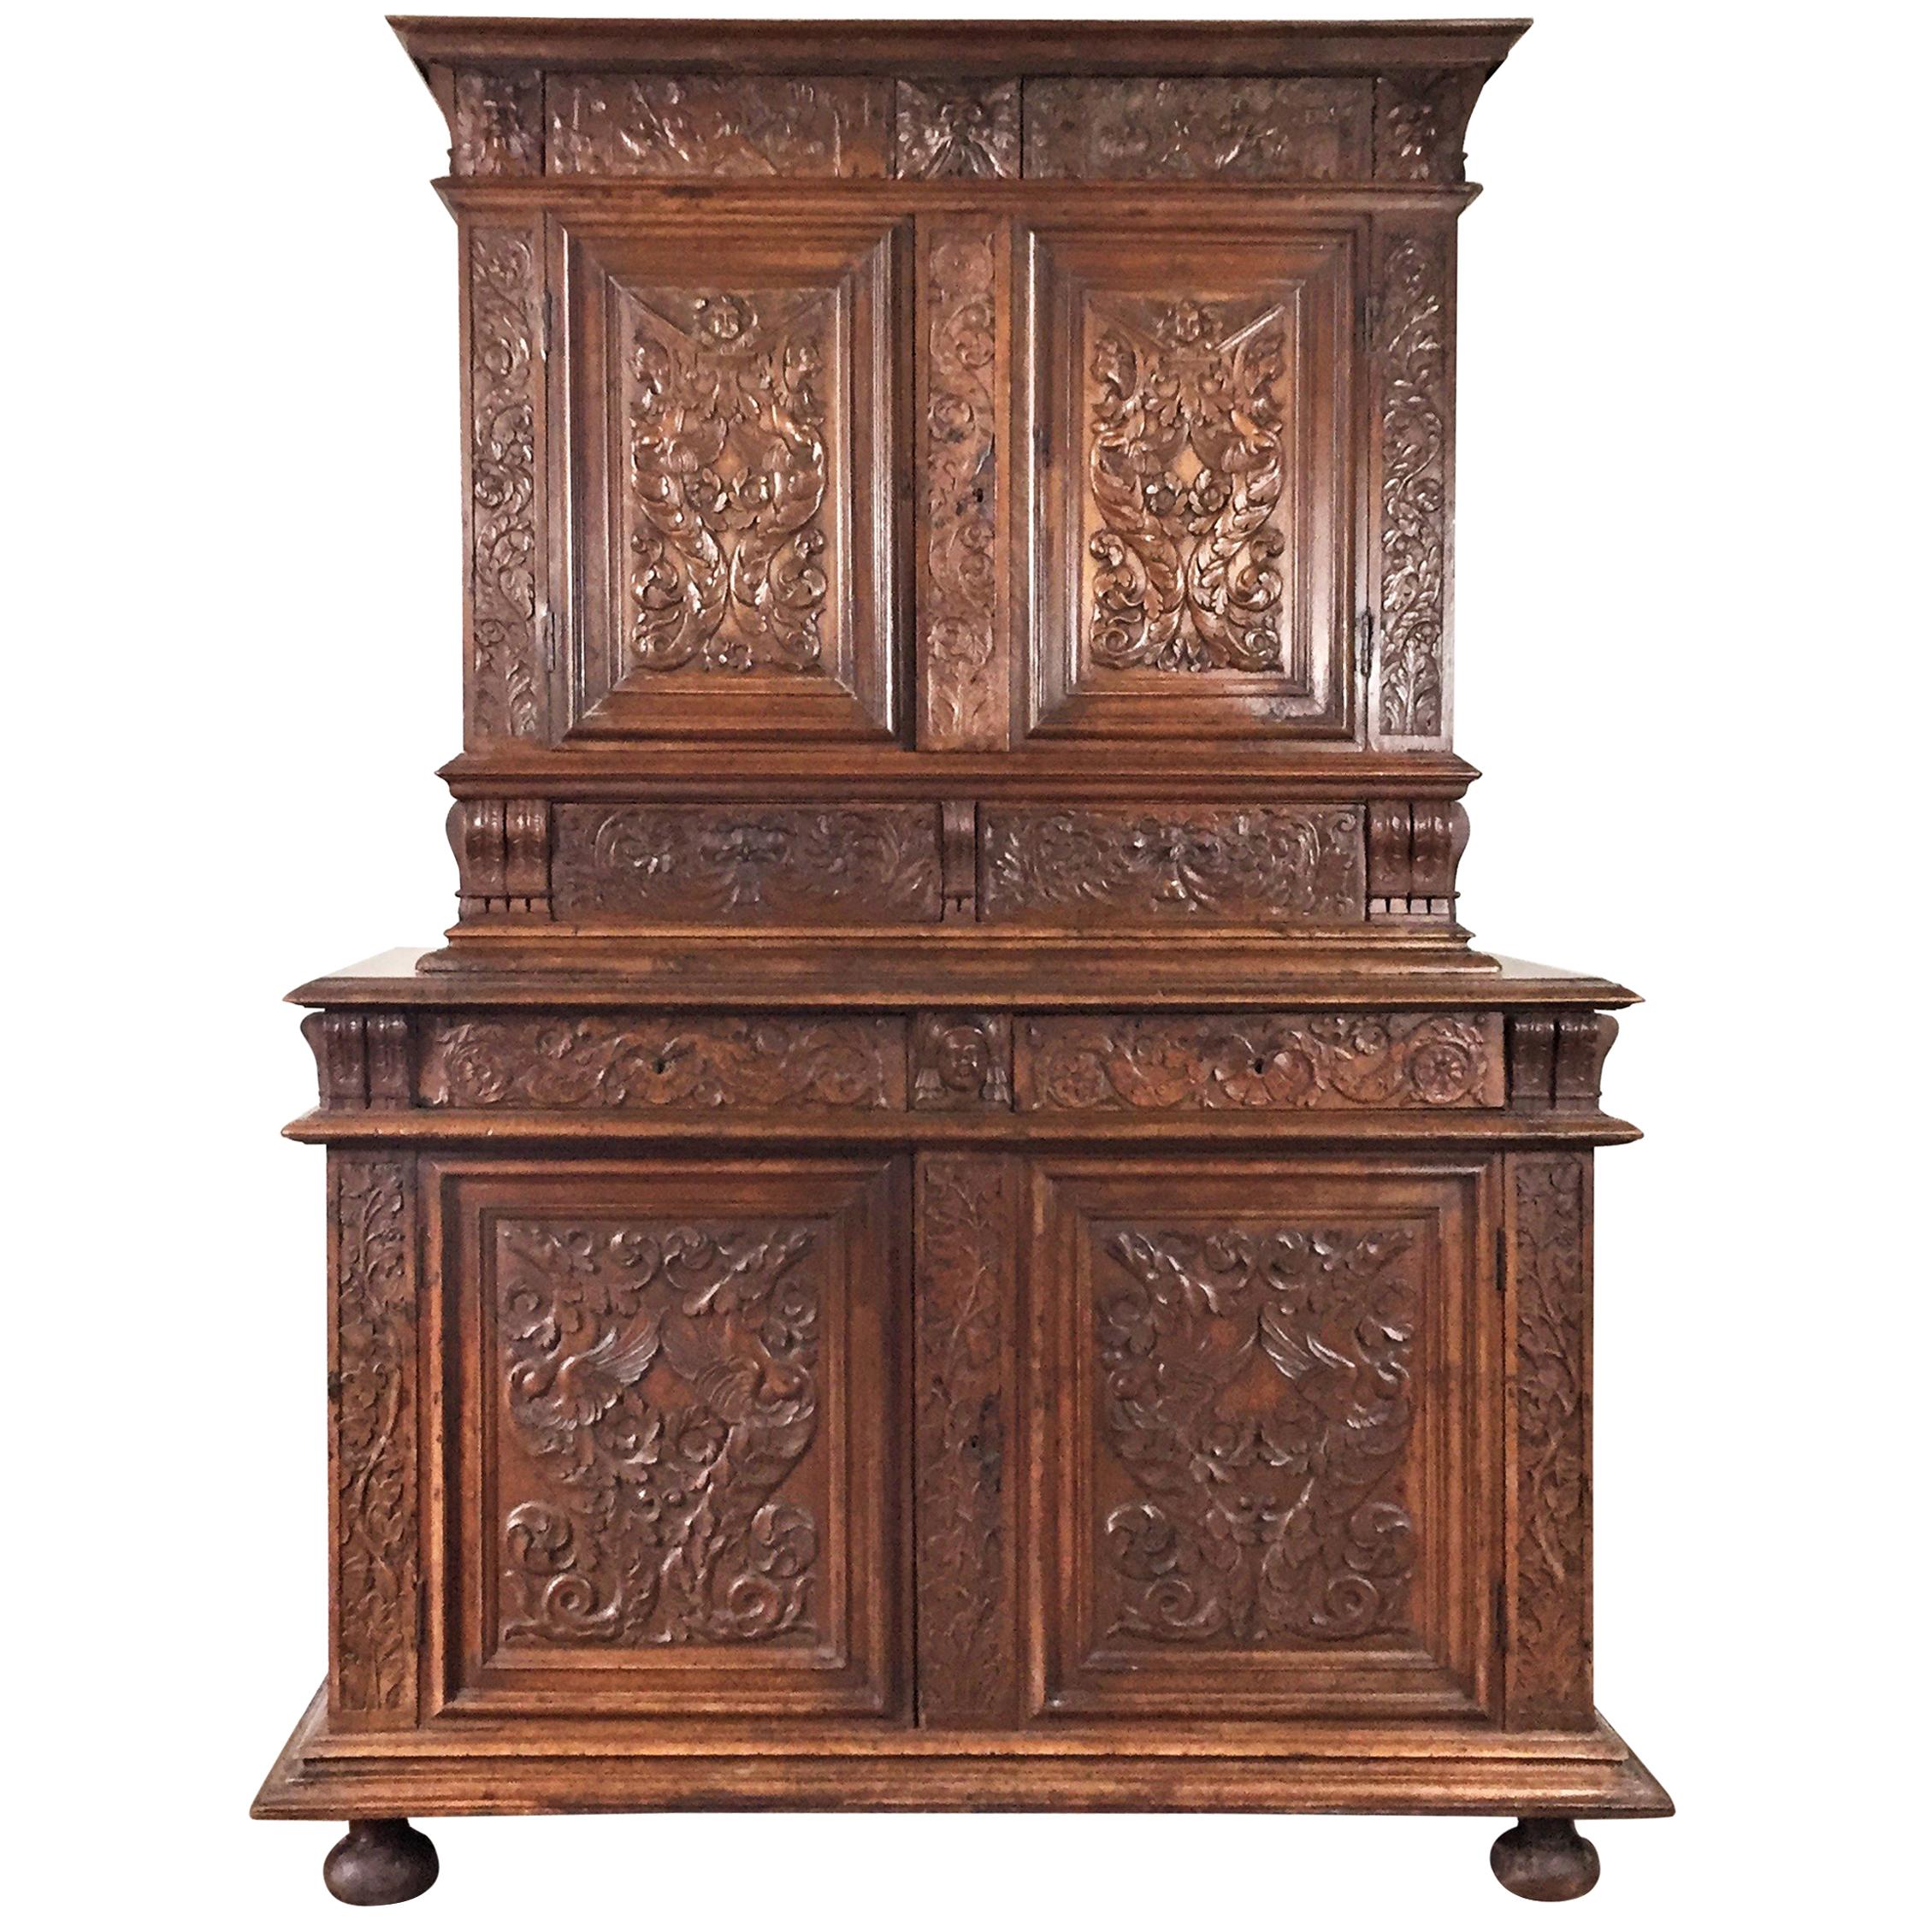 French Richly Carved Sideboard Buffet - Renaissance- circa 1580 France